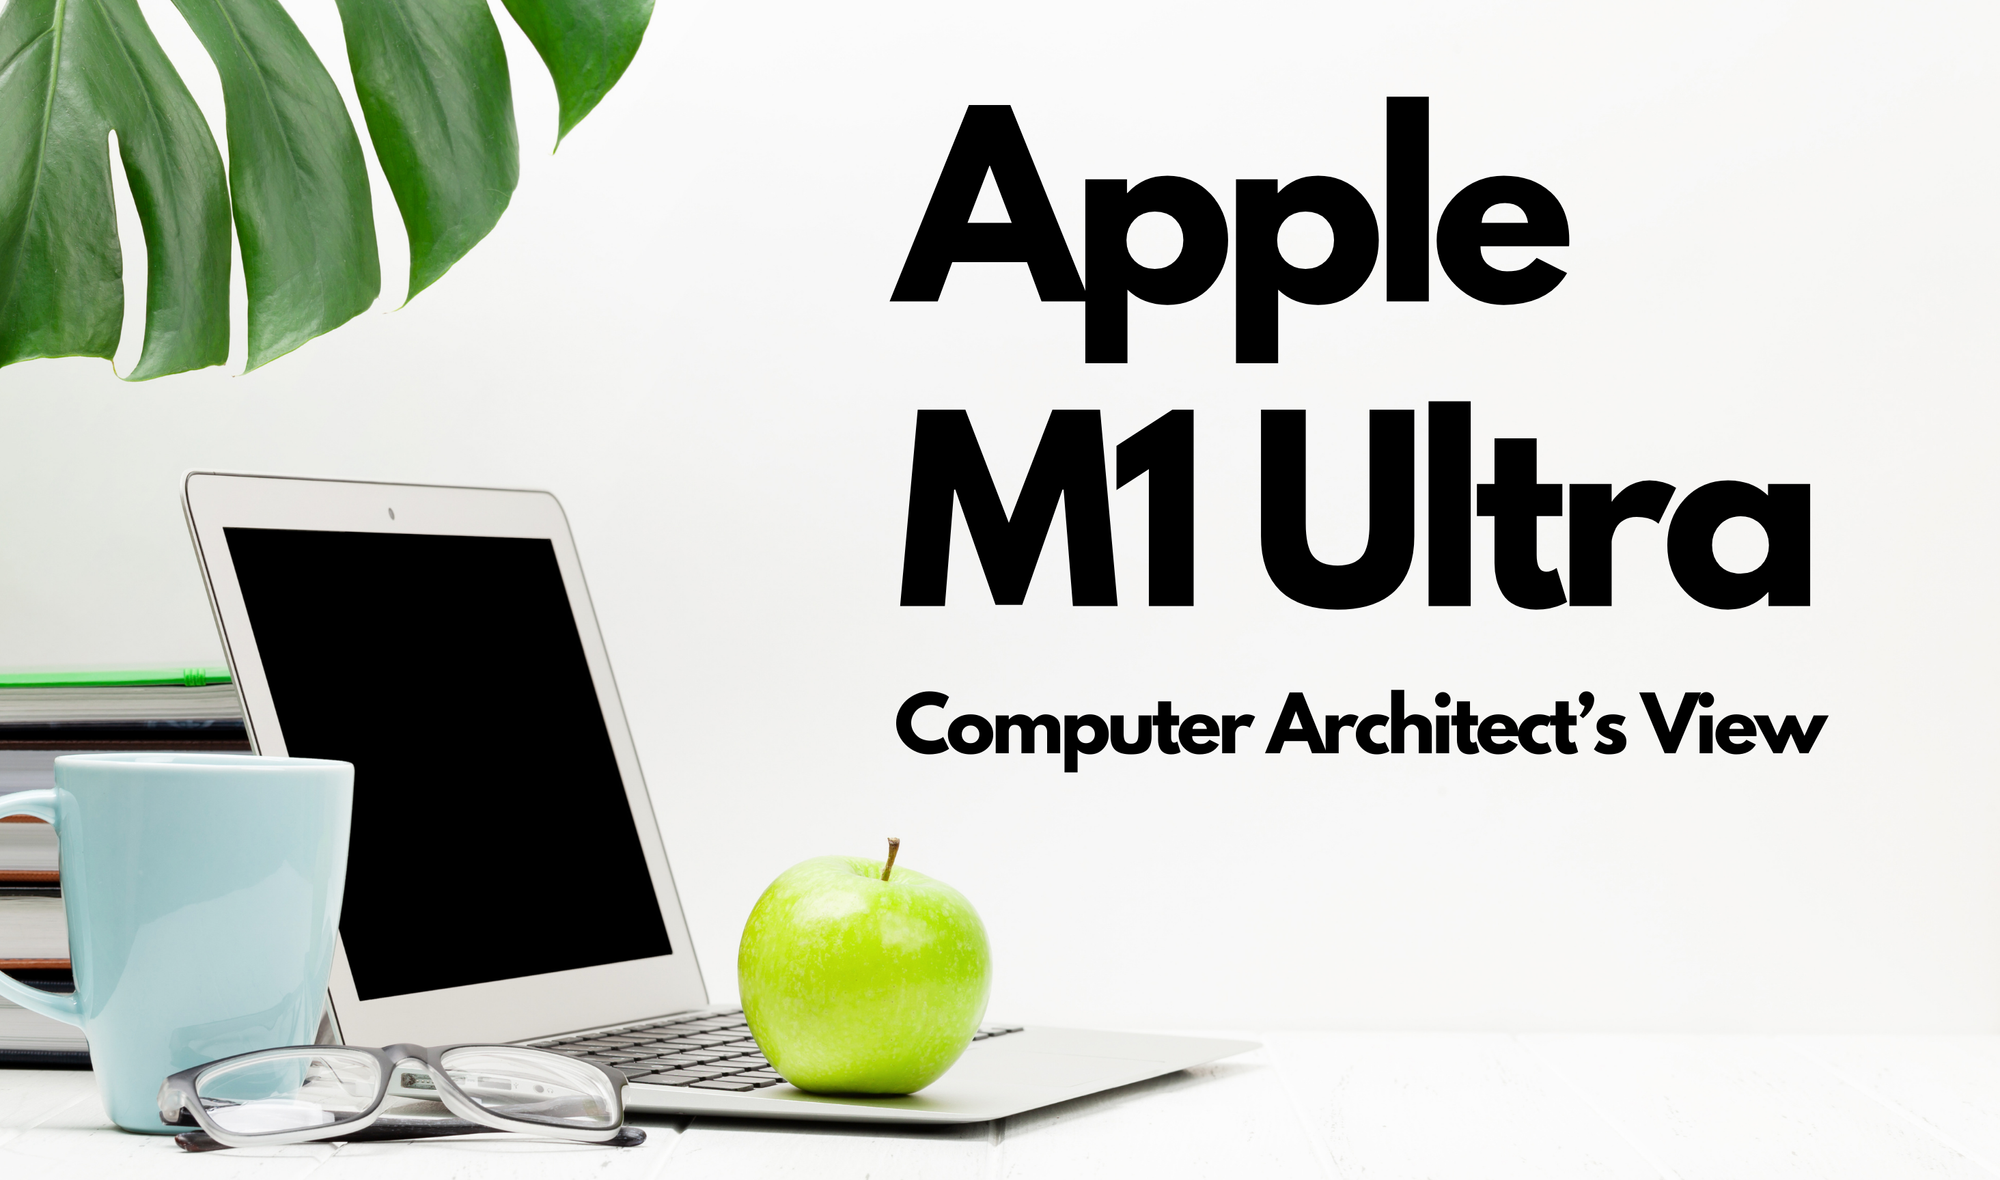 Computer Architect’s View on Apple M1 Ultra Chip